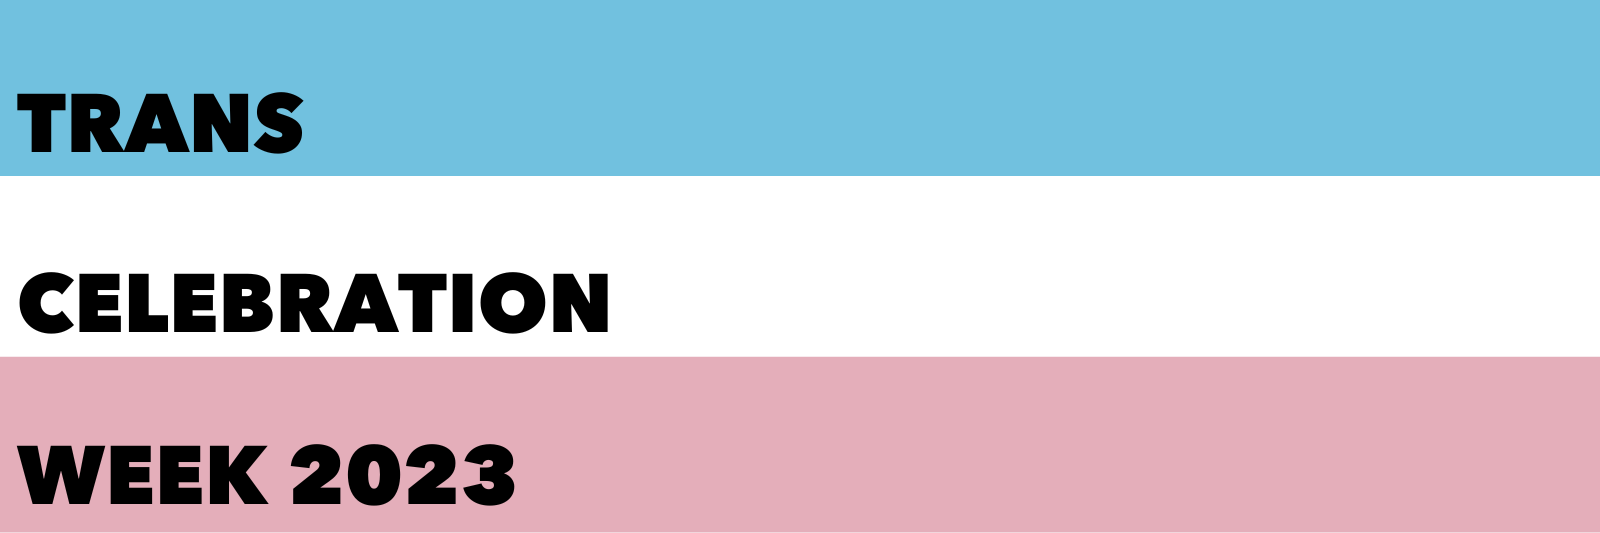 A stripe of blue with the word "Trans" in black; a stripe of white with the word "celebration" in black; a stripe of pink with the words "week 2023" in black